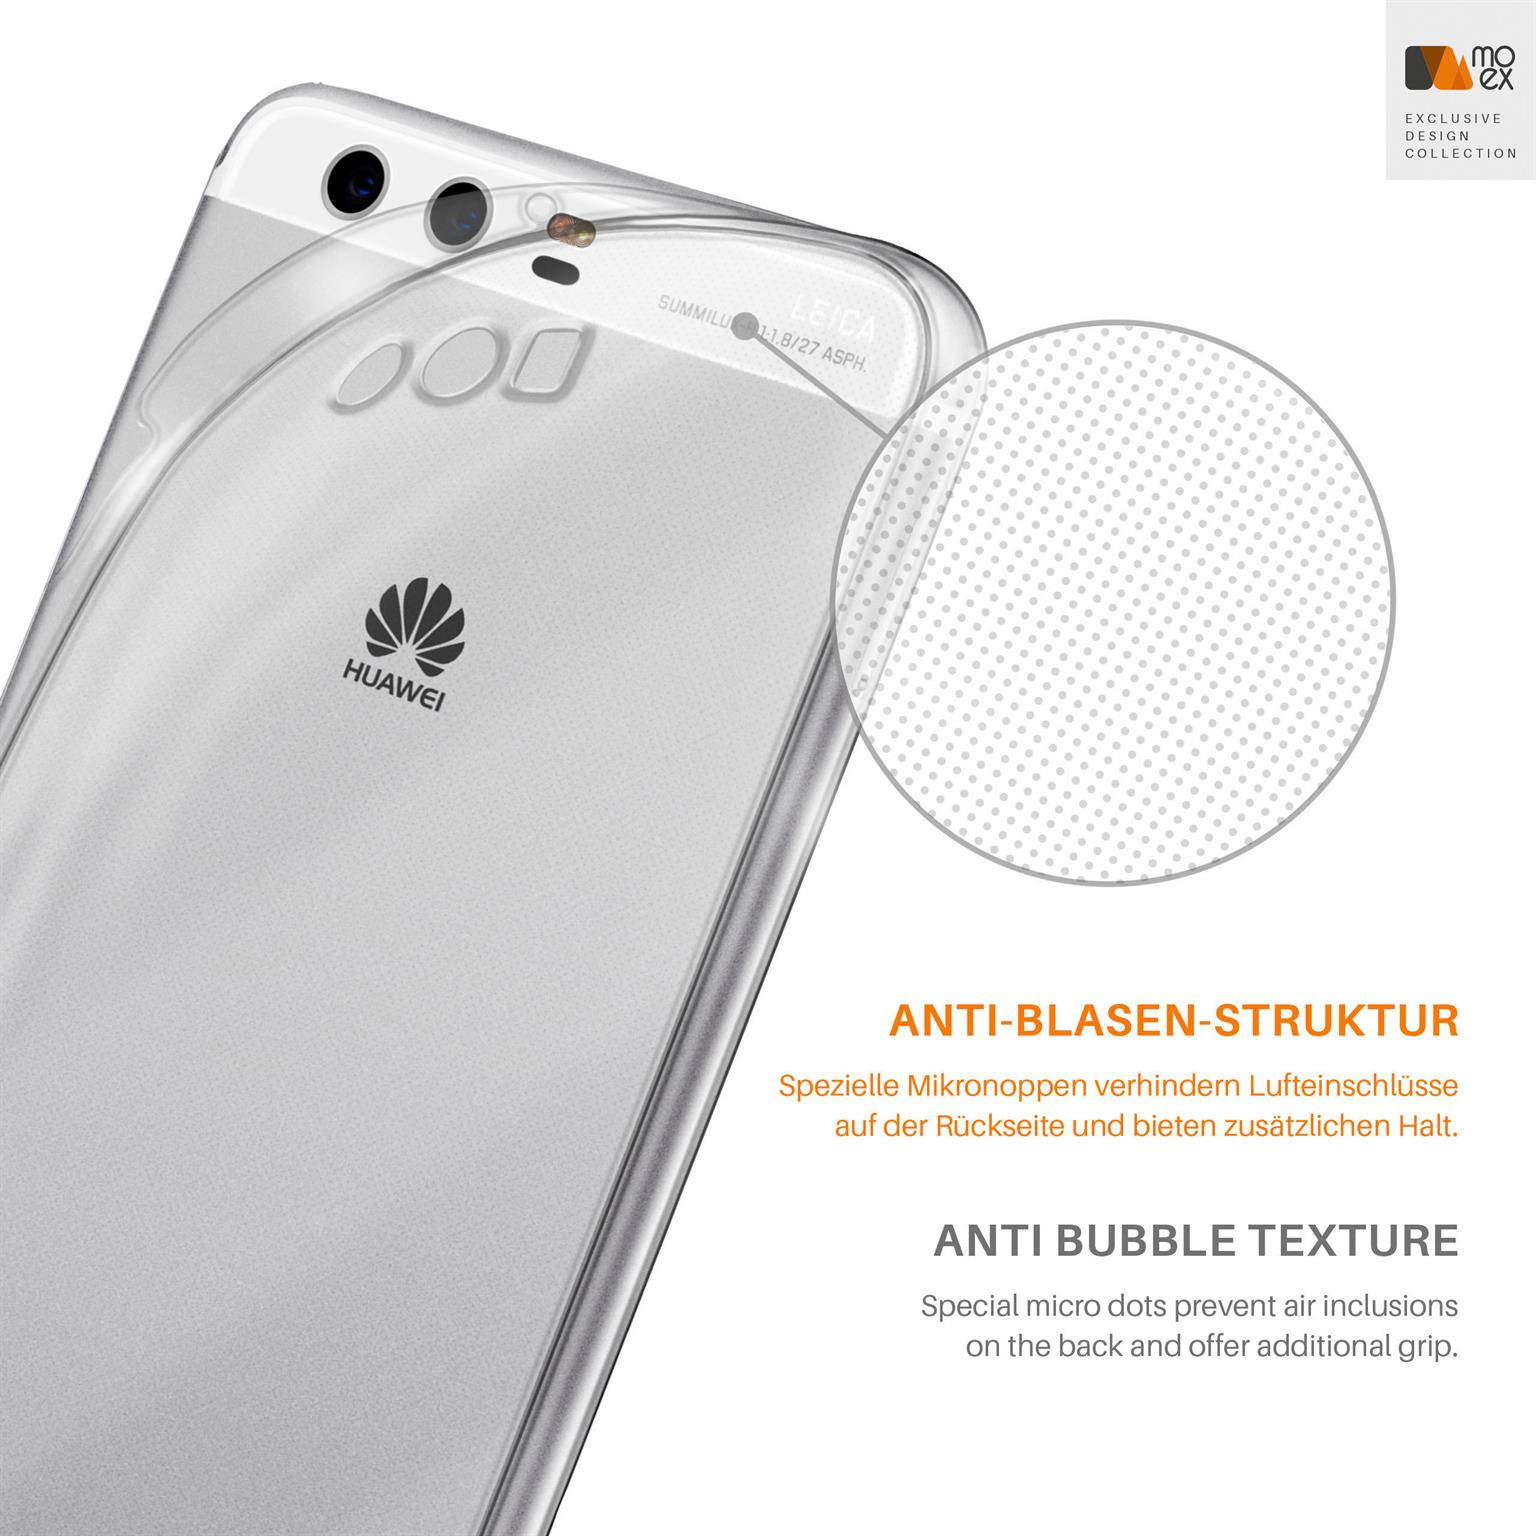 Crystal-Clear MOEX P10, Backcover, Aero Huawei, Case,